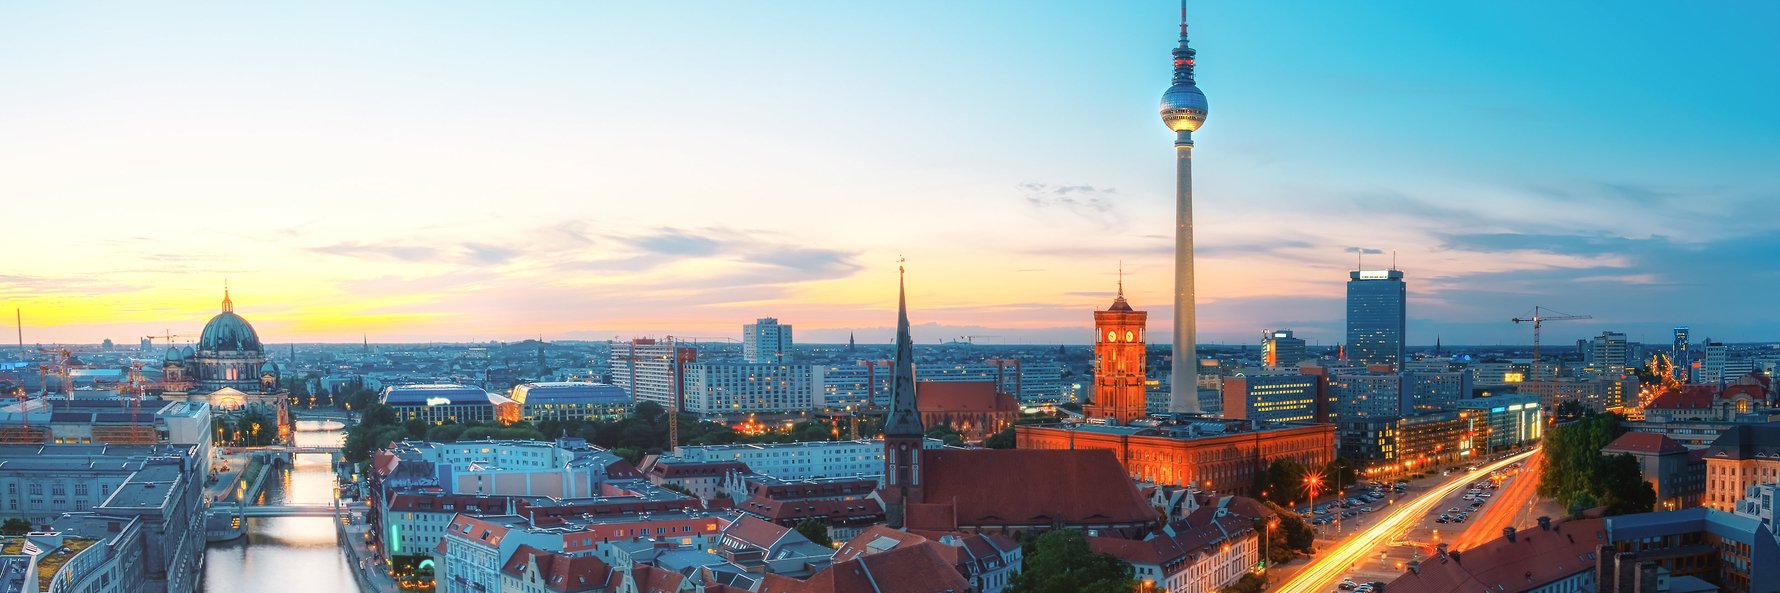 We’re not afraid of a little cliched romance. What could be more delightful than watching Berlin spread out in front of you, with the object of your affection alongside you? Make a beeline for the Fernsehturm (TV Tower) and grab a kiss some 368 metres in the sky.